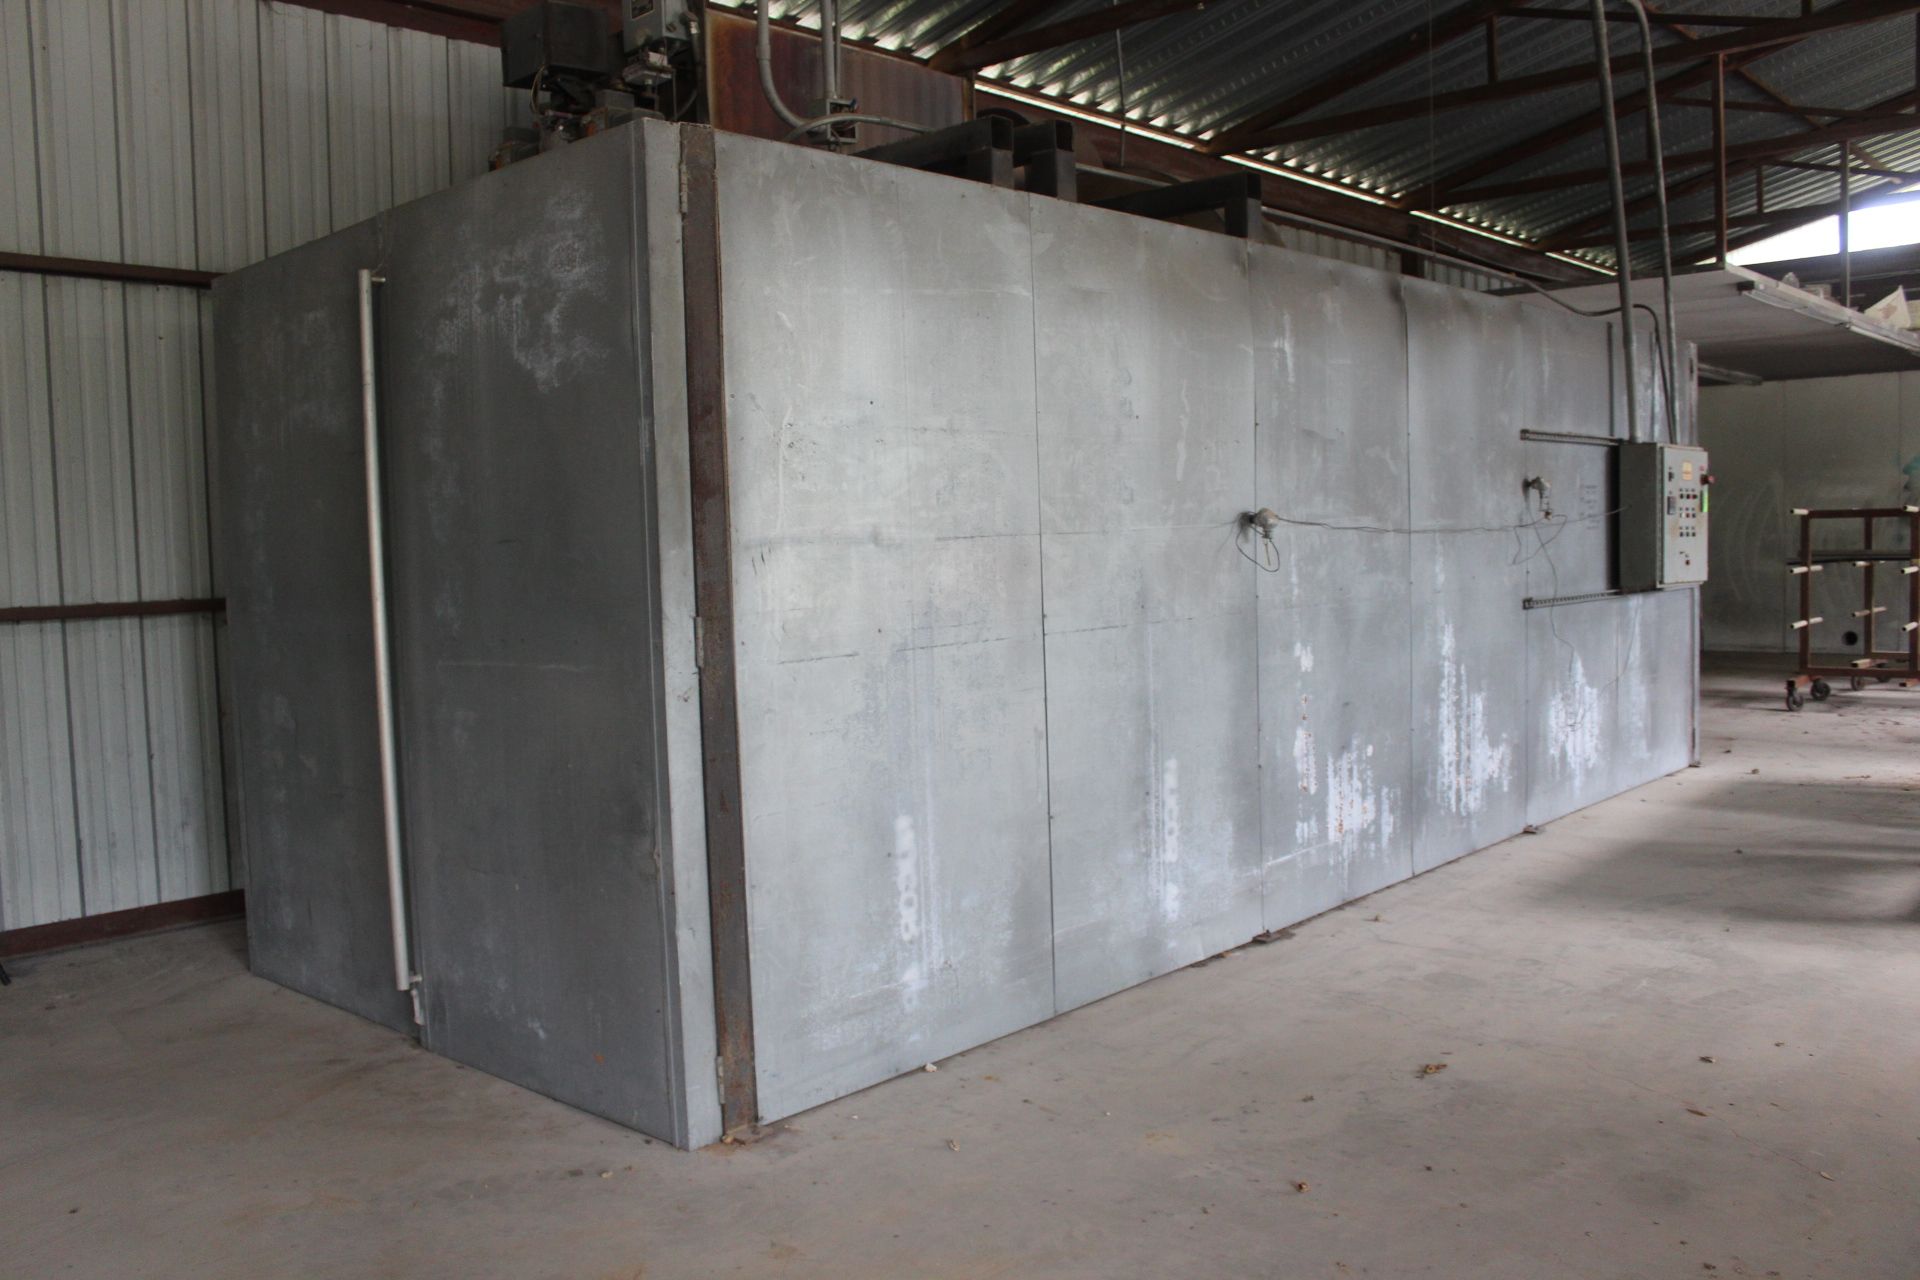 Large Maxon Powder Coat/Paint Booth, Dimensions Approx. 25'L x 8'10"W x 8'5"H - Image 2 of 8